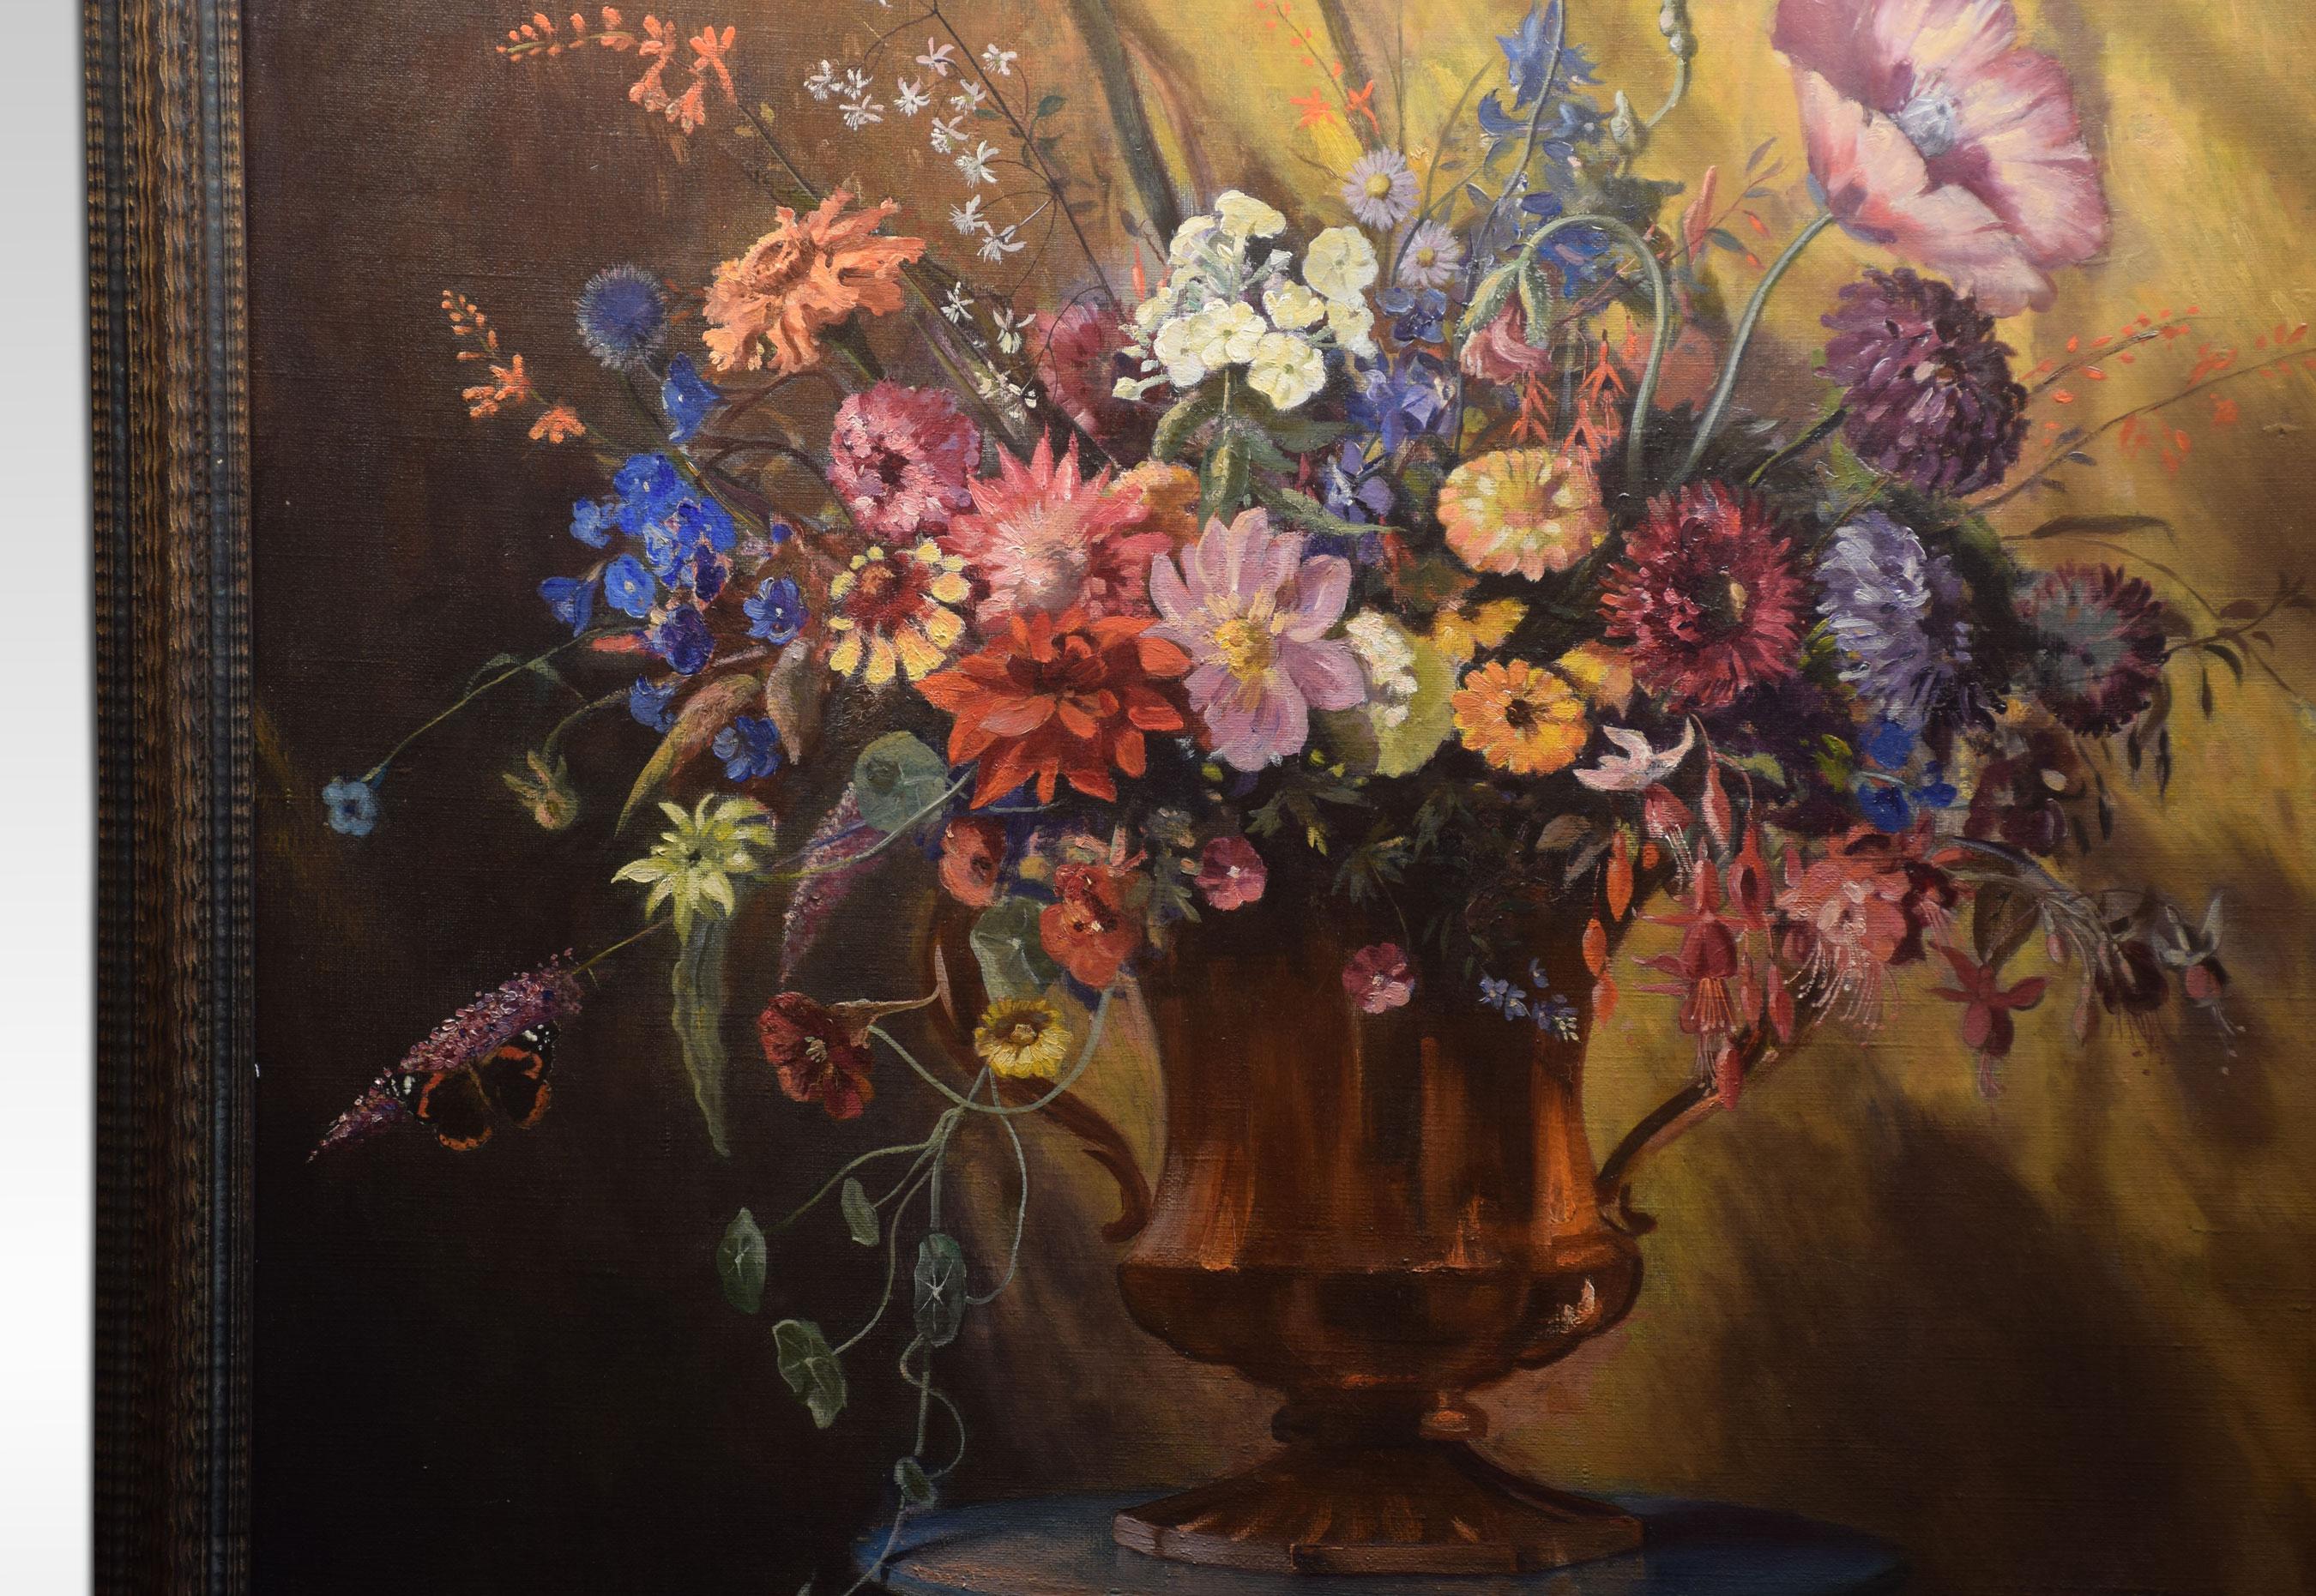 Oil on canvas depicting a still life of flowers in an urn signed Charles Percival Small.
Dimensions:
Height 38 inches
Width 39 inches
Depth 2.5 inches.